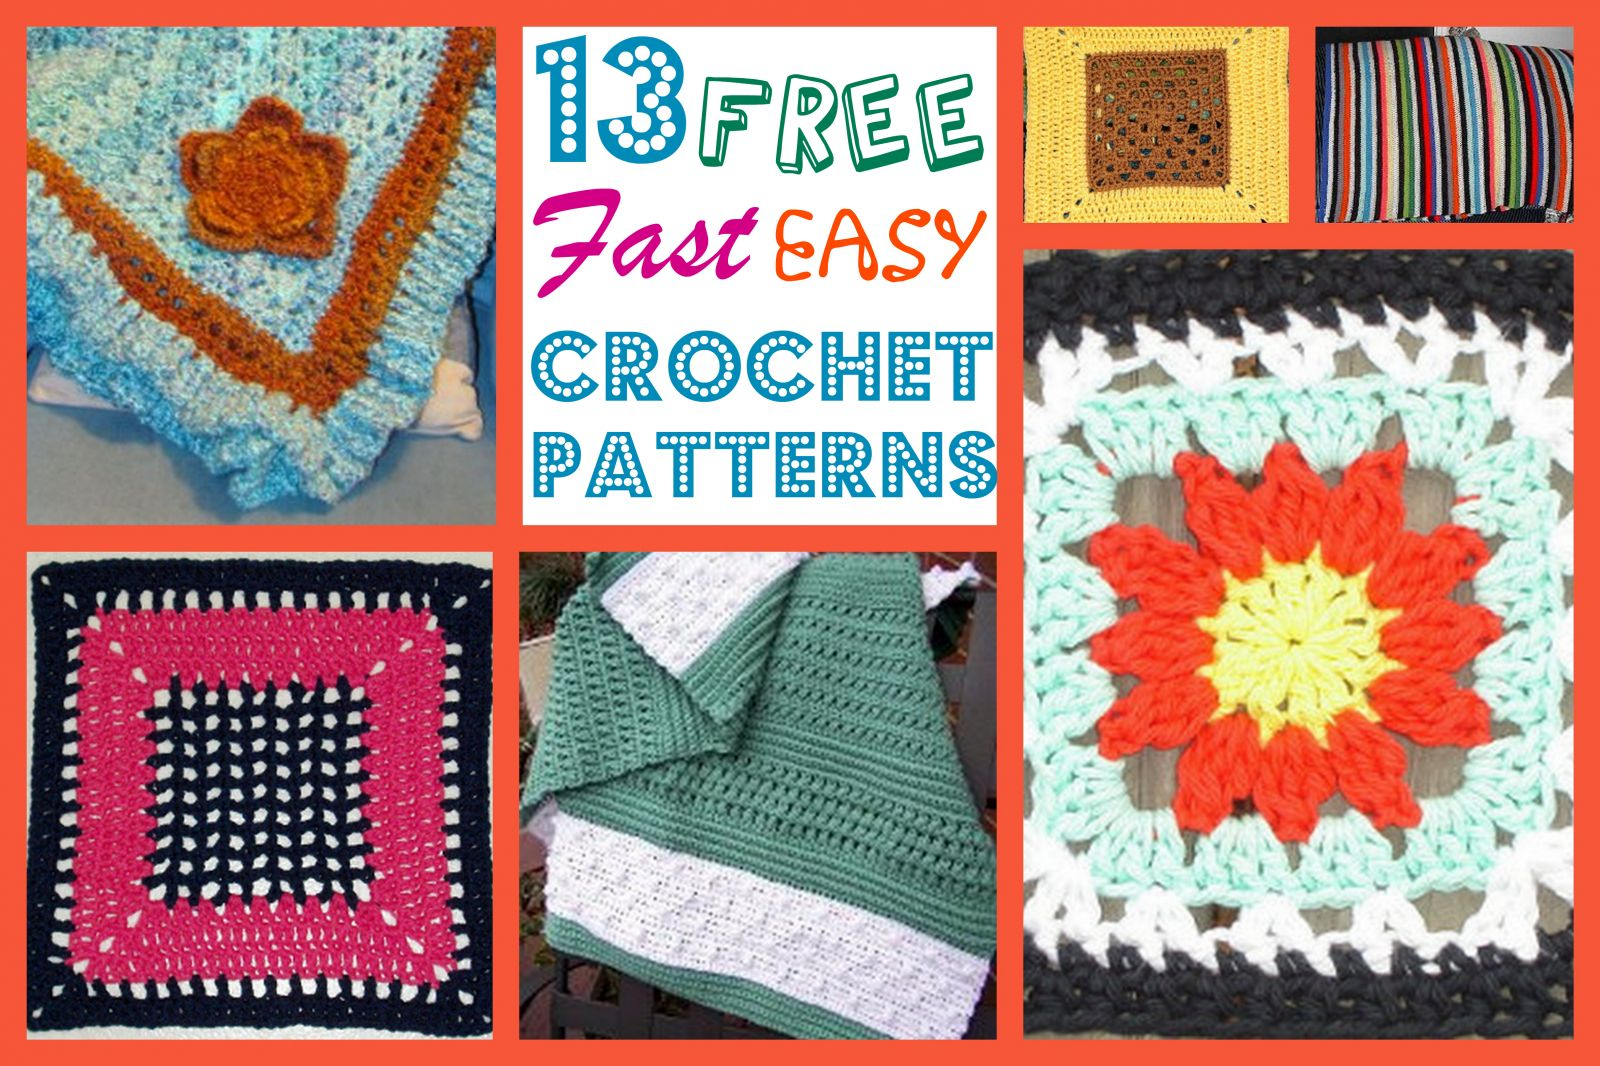 Begginer Crochet Projects Easy Patterns 13 Free Fast Easy Crochet Patterns Allfreecrochetafghanpatterns